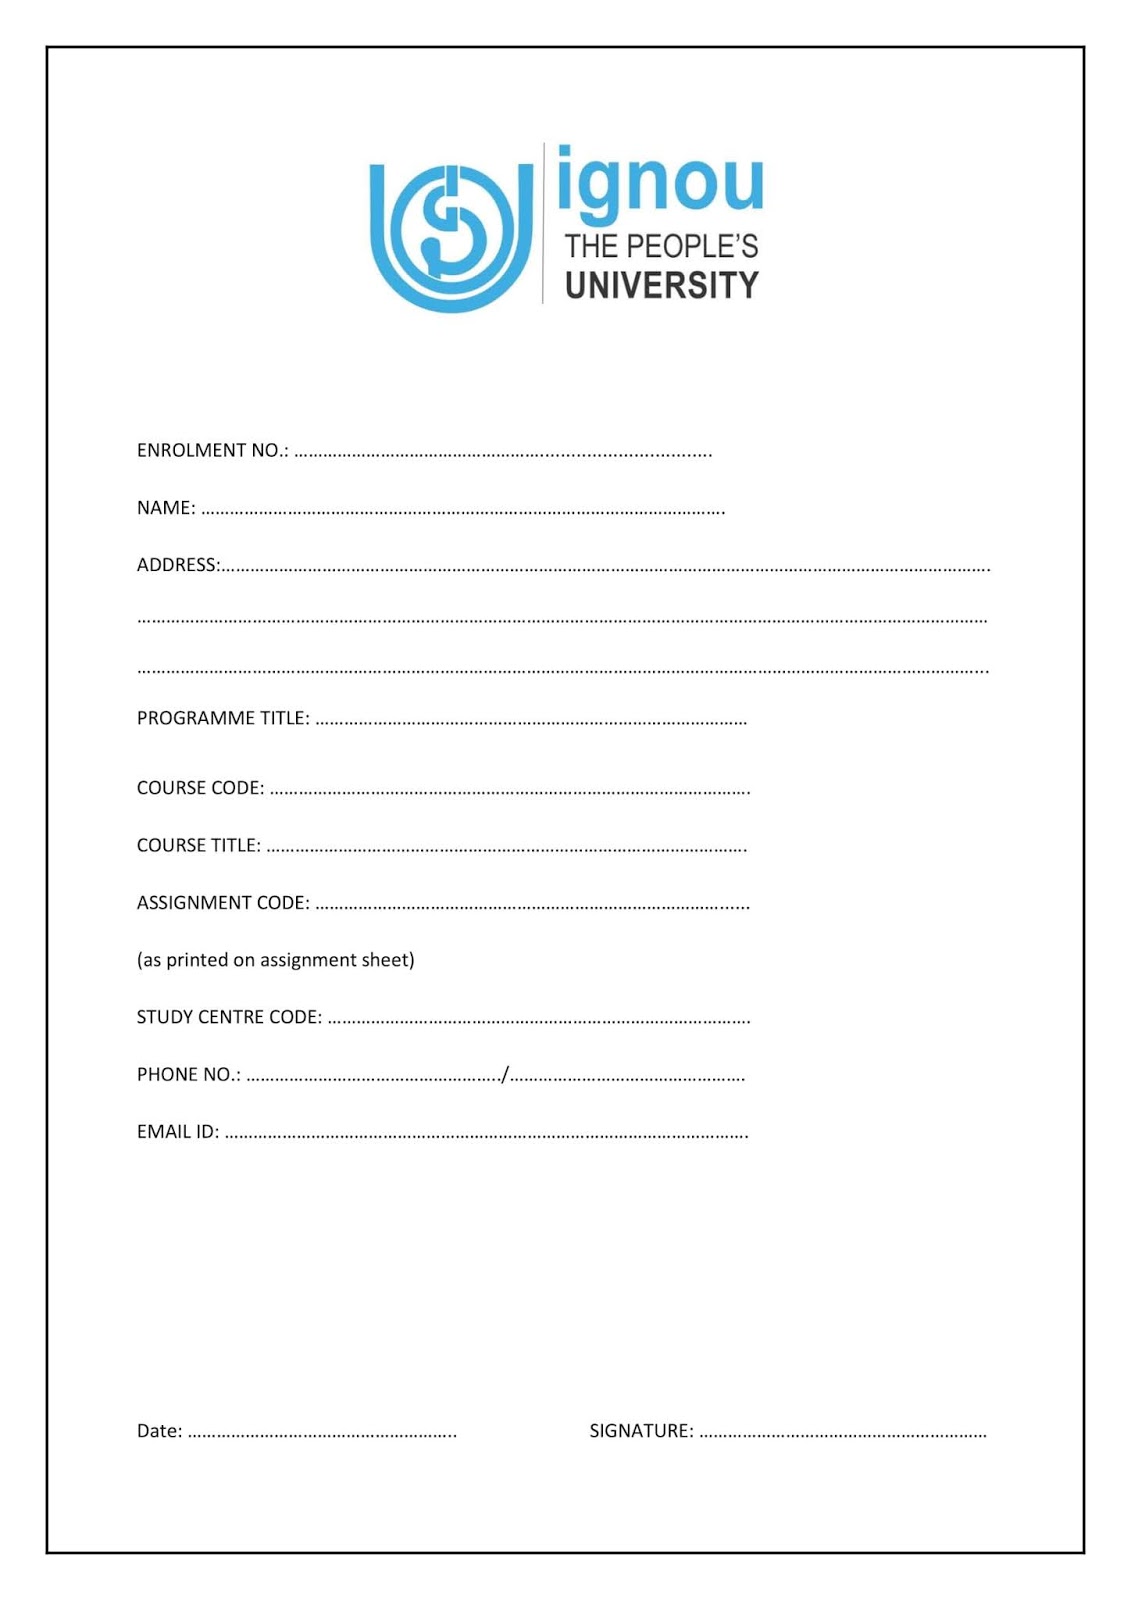 ignou front page assignment 2021